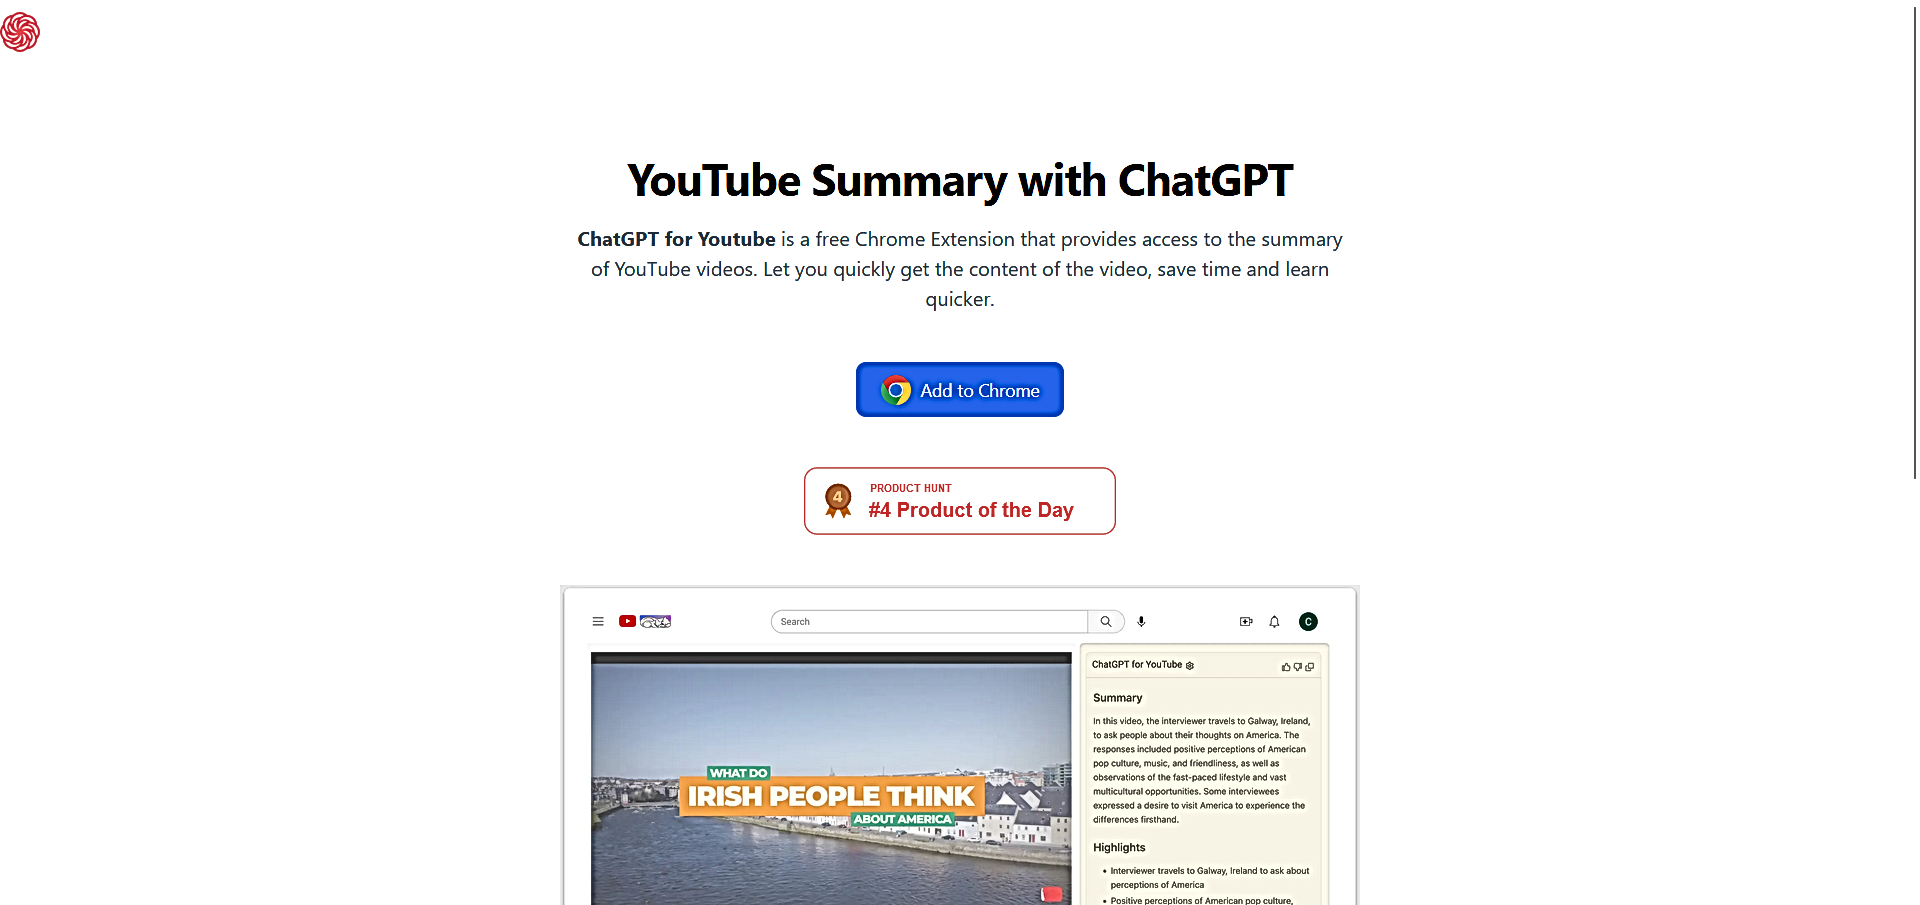 ChatGPT for Youtube featured